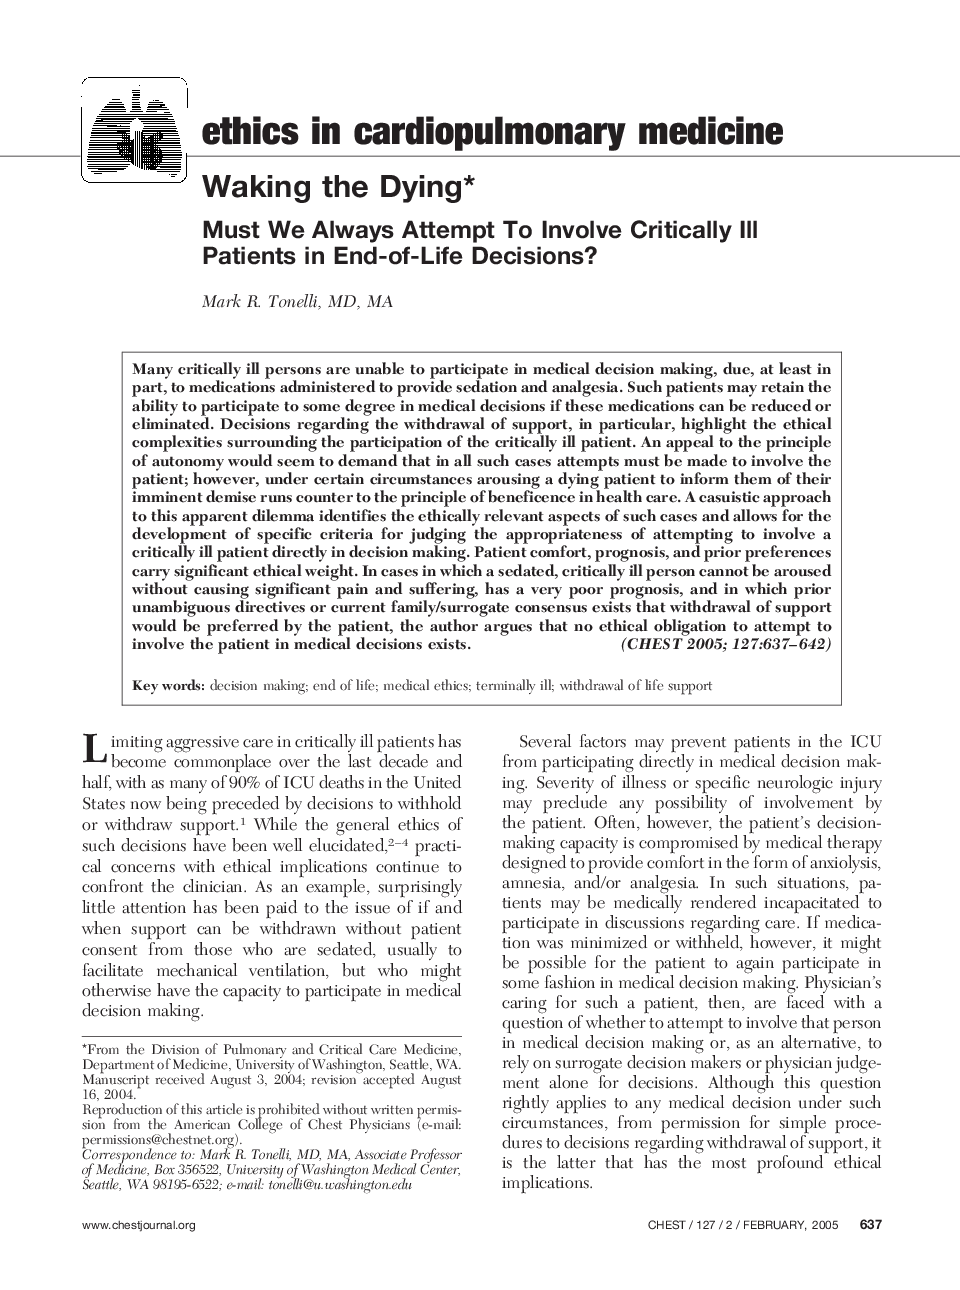 Waking the Dying